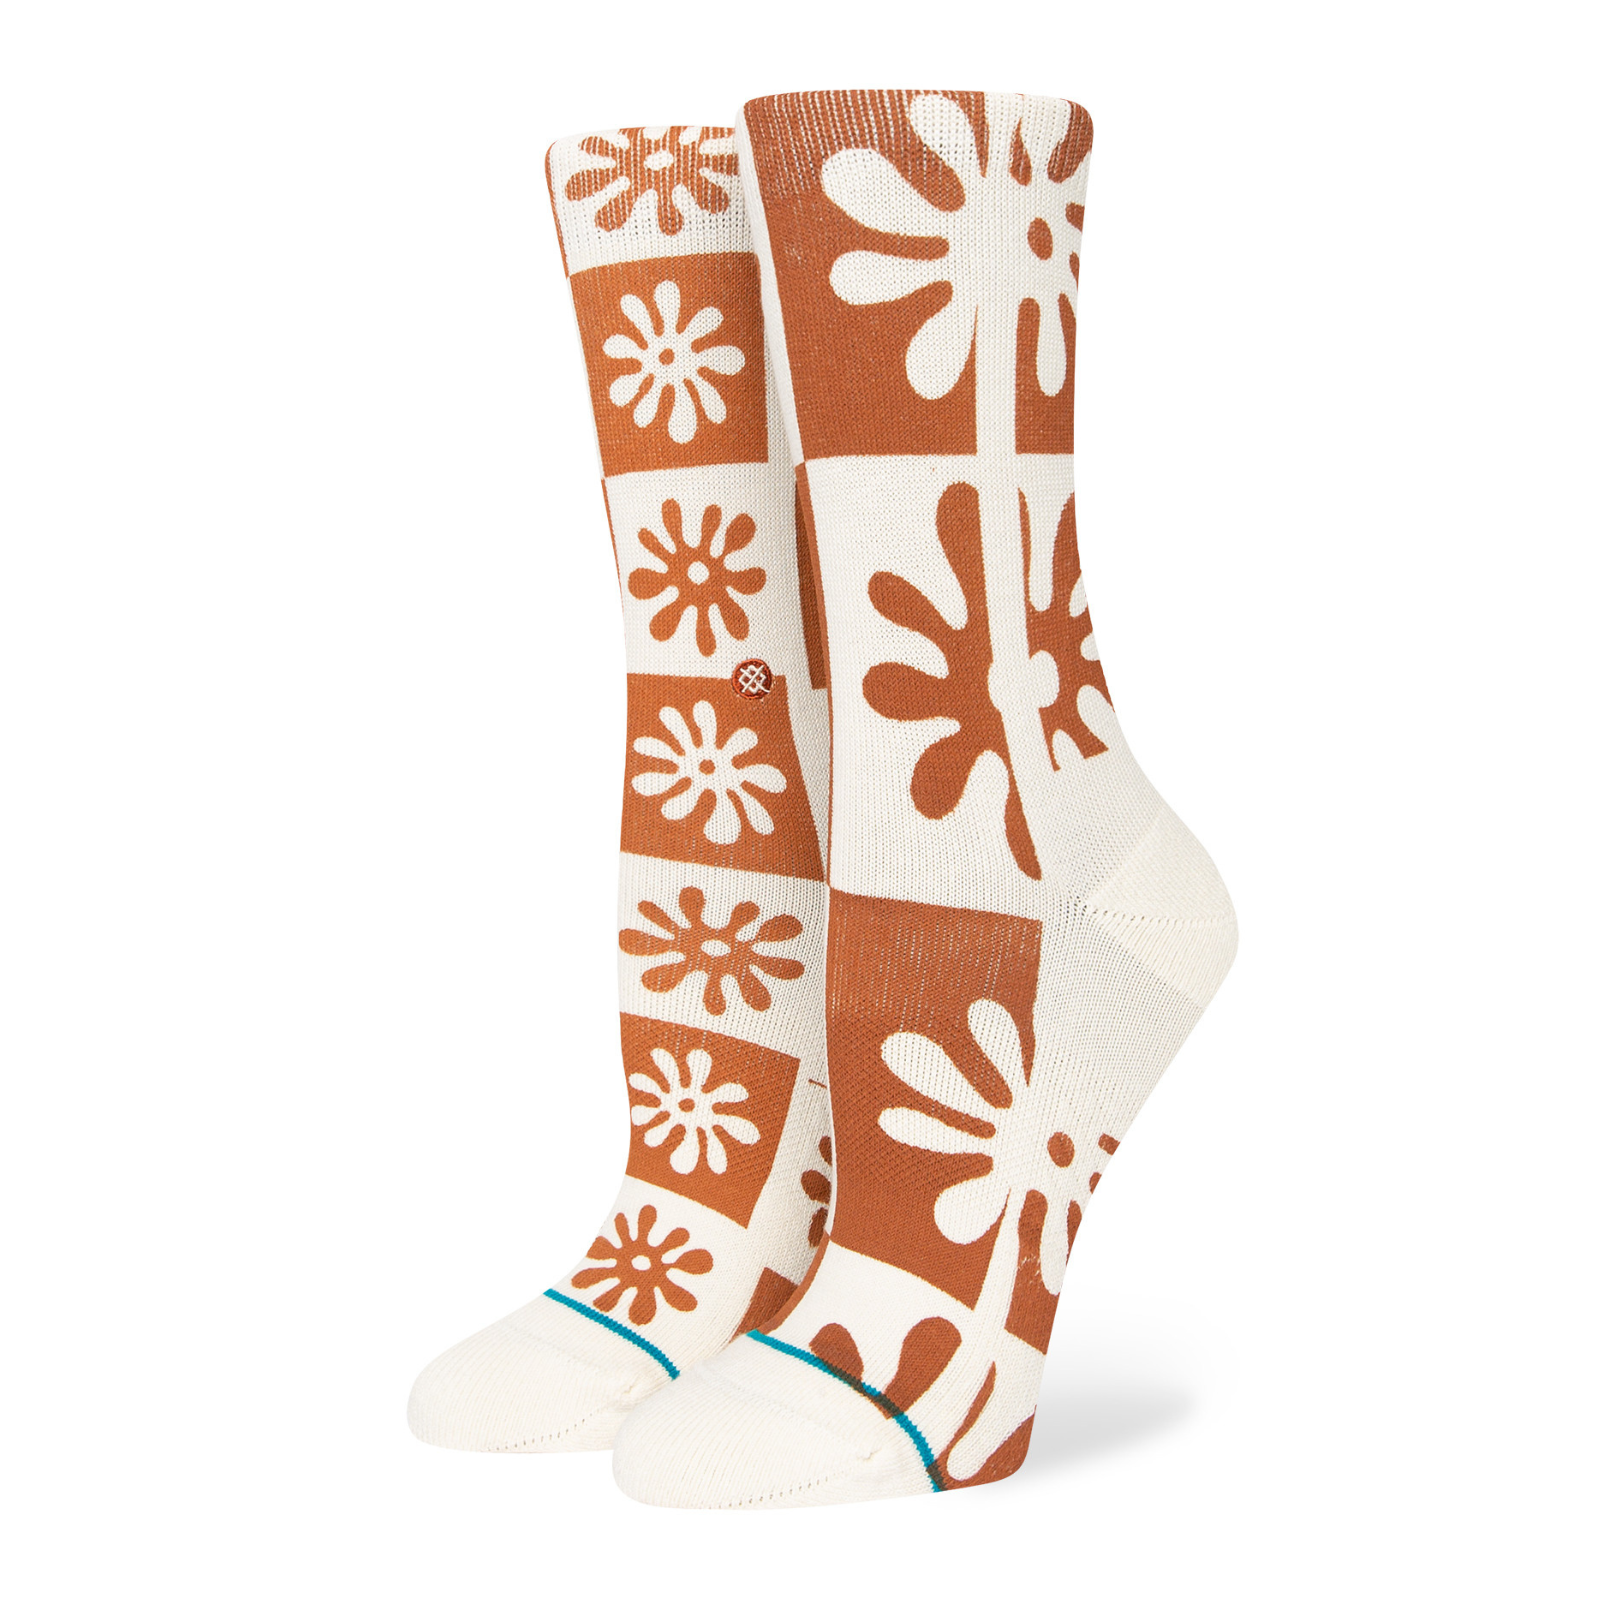 Stance Flower Girl women's crew sock featuring off white sock with brown abstract flower pattern all over on display feet